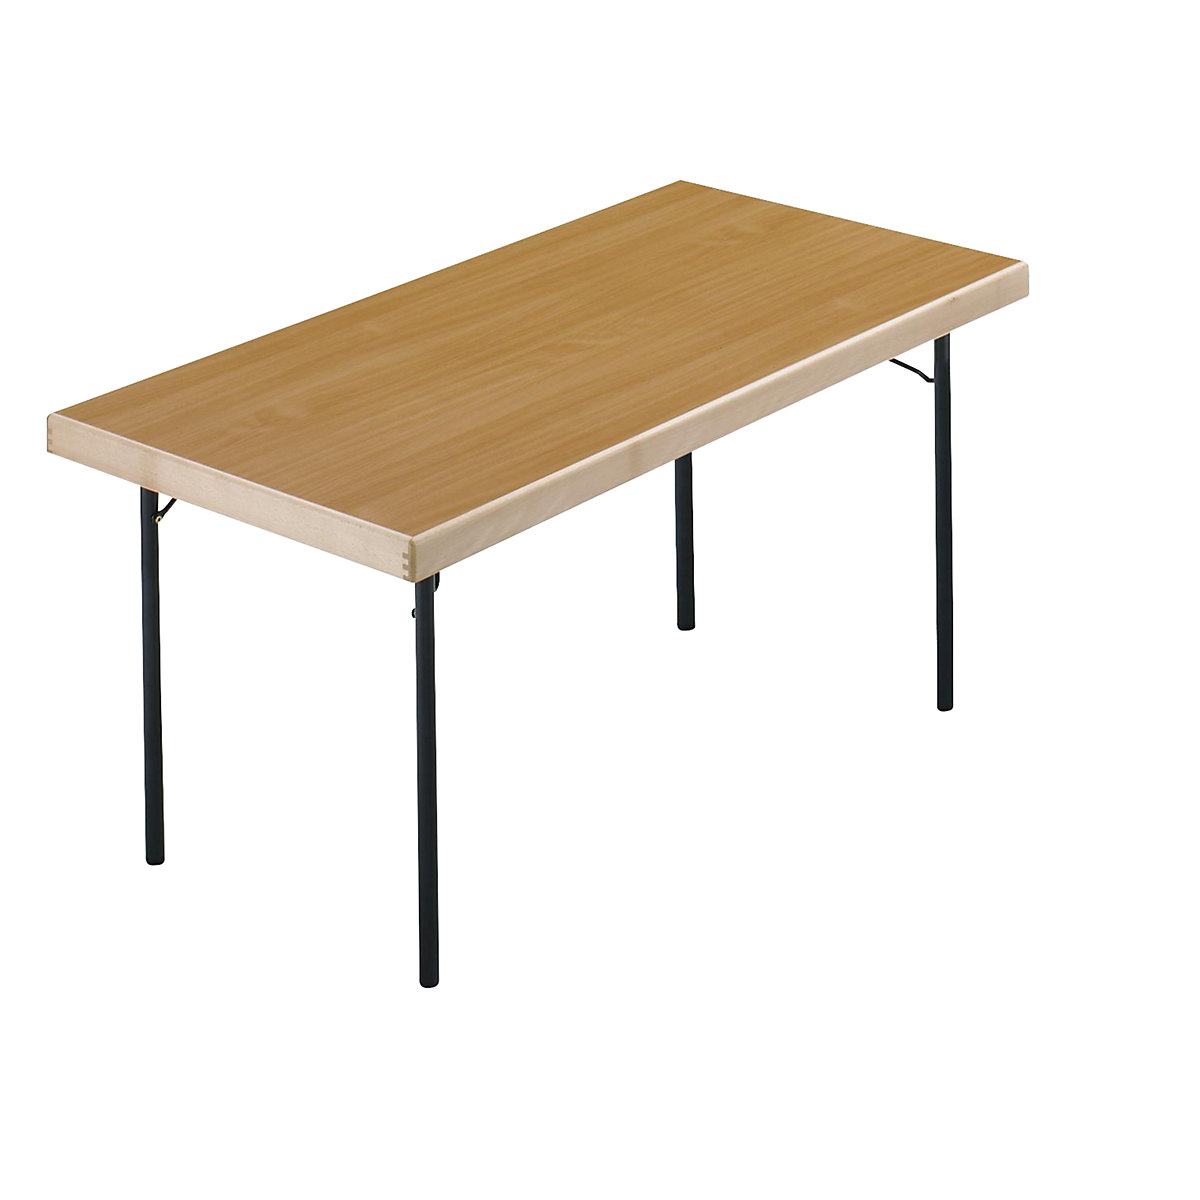 Folding table, 4-footed frame, 1500 x 800 mm, charcoal frame, beech finish tabletop-11